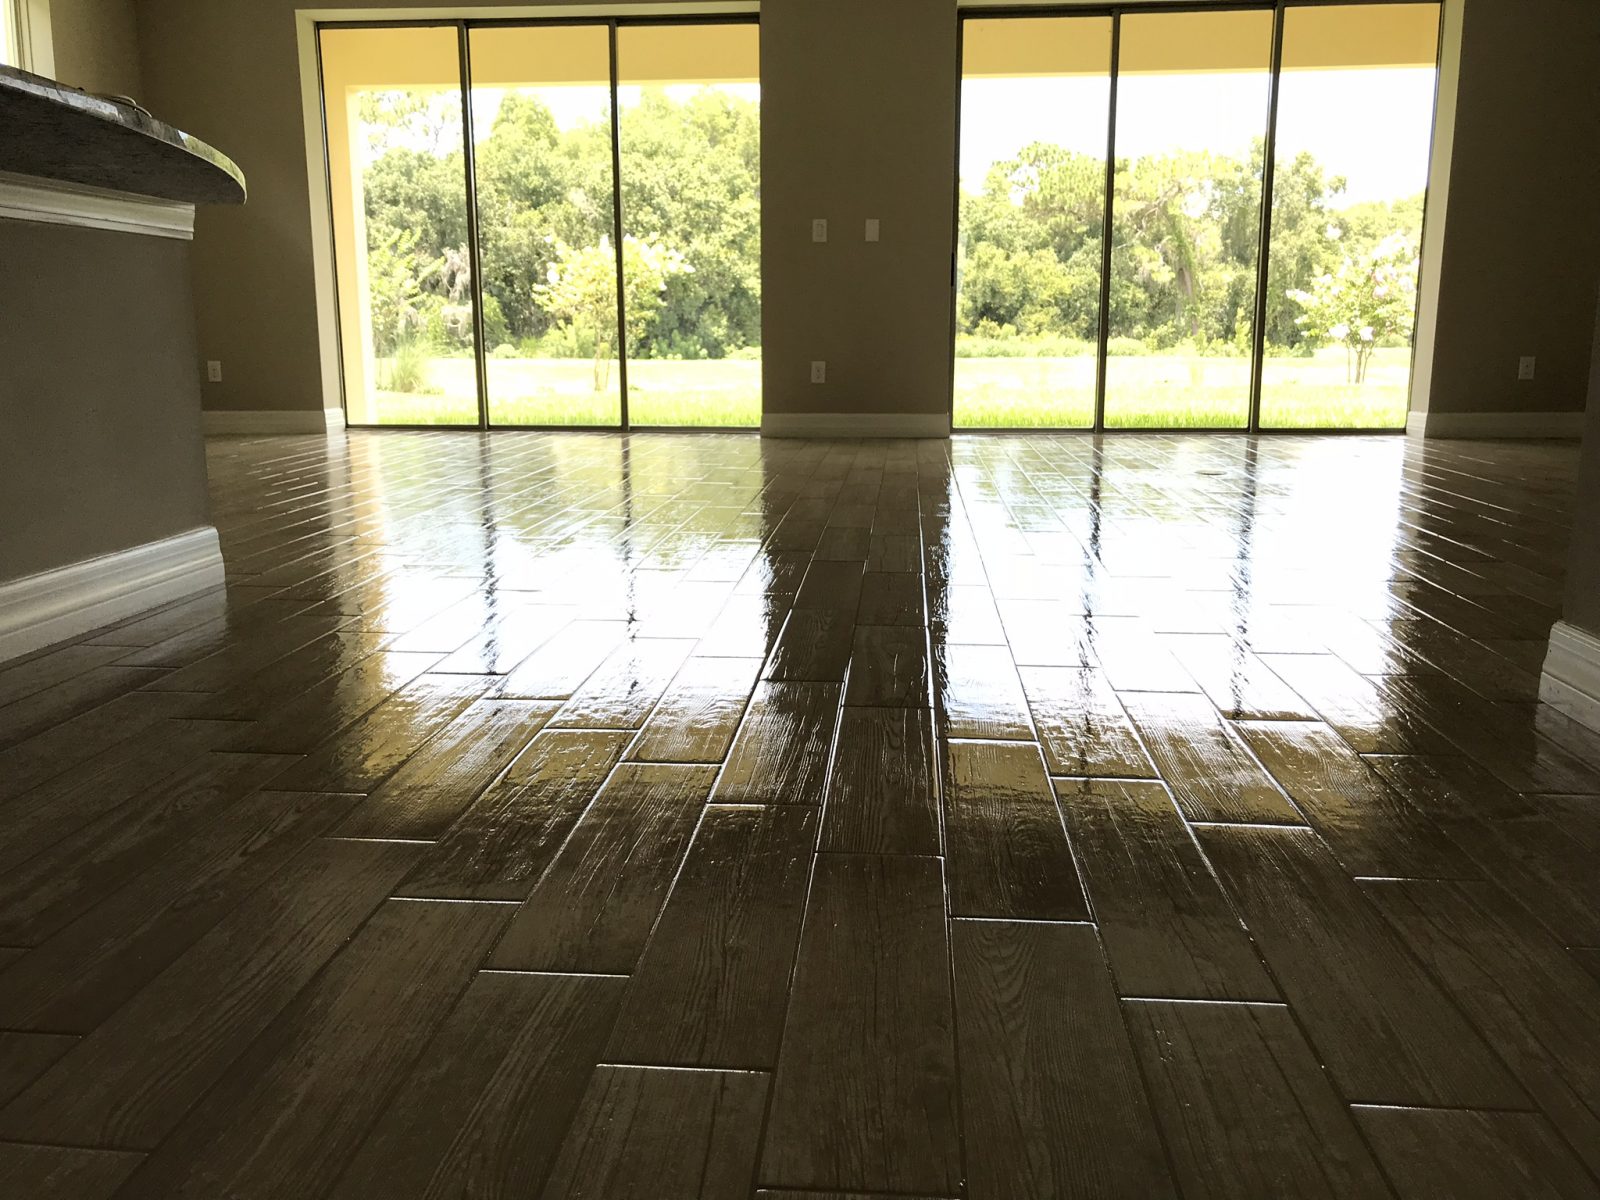 Professional Tile & Grout Cleaning Dunedin Florida by Howards Cleaning Service